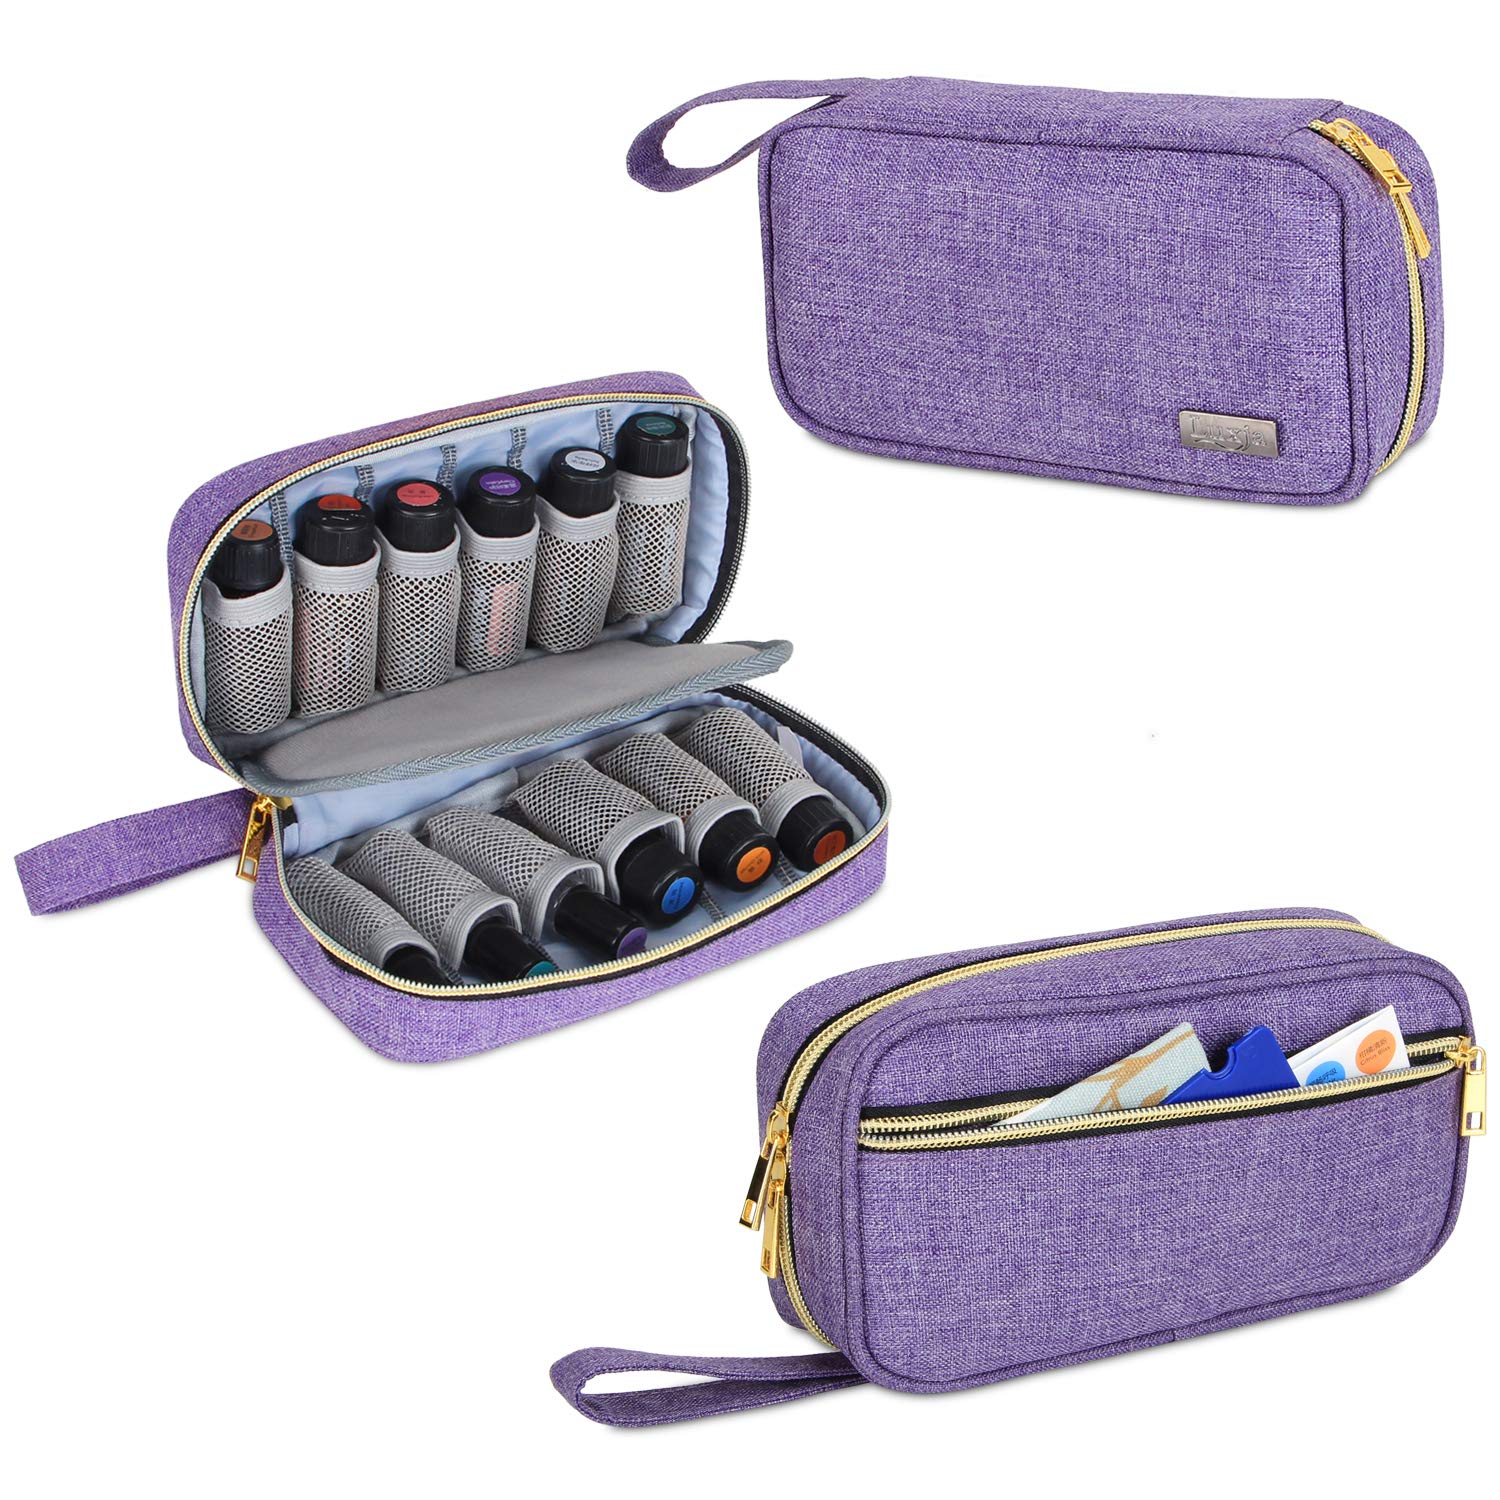 LUXJA Essential Oil Carrying Case - Holds 12 Bottles (5ml-15ml, Including Roller Bottles), Portable Organizer for Essential Oil and Accessories (Bag Only), Purple